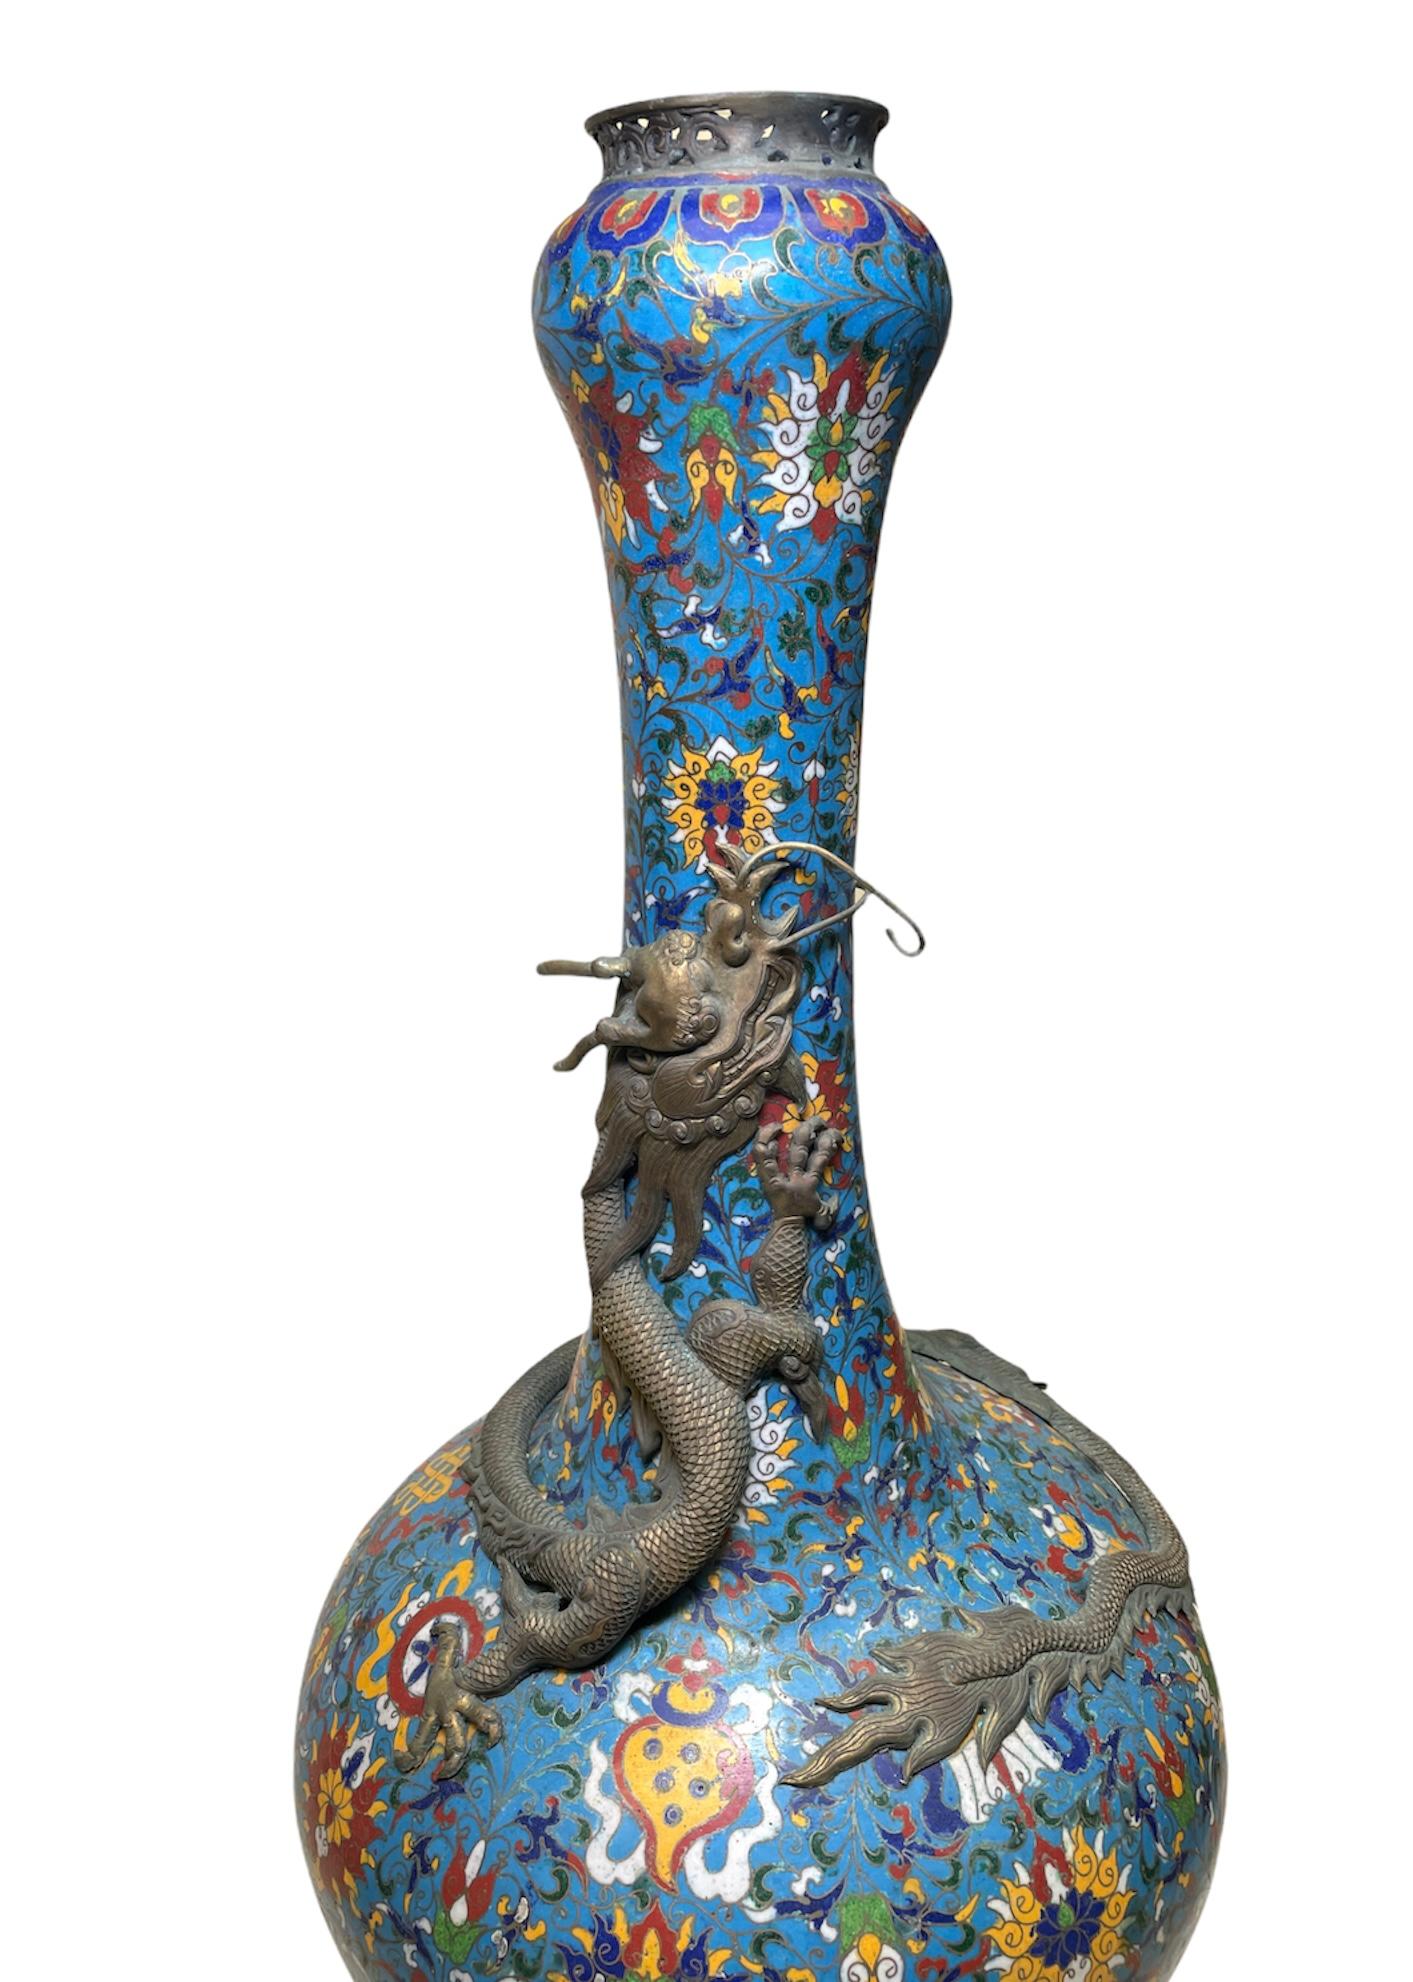 This is a Chinese colorful cloisonné large vase with long neck and round belly. It has a turquoise background adorned with different flowers, scrolls leaves and Chinese knots in multiple bright colors. There is a large bronze dragon that has already